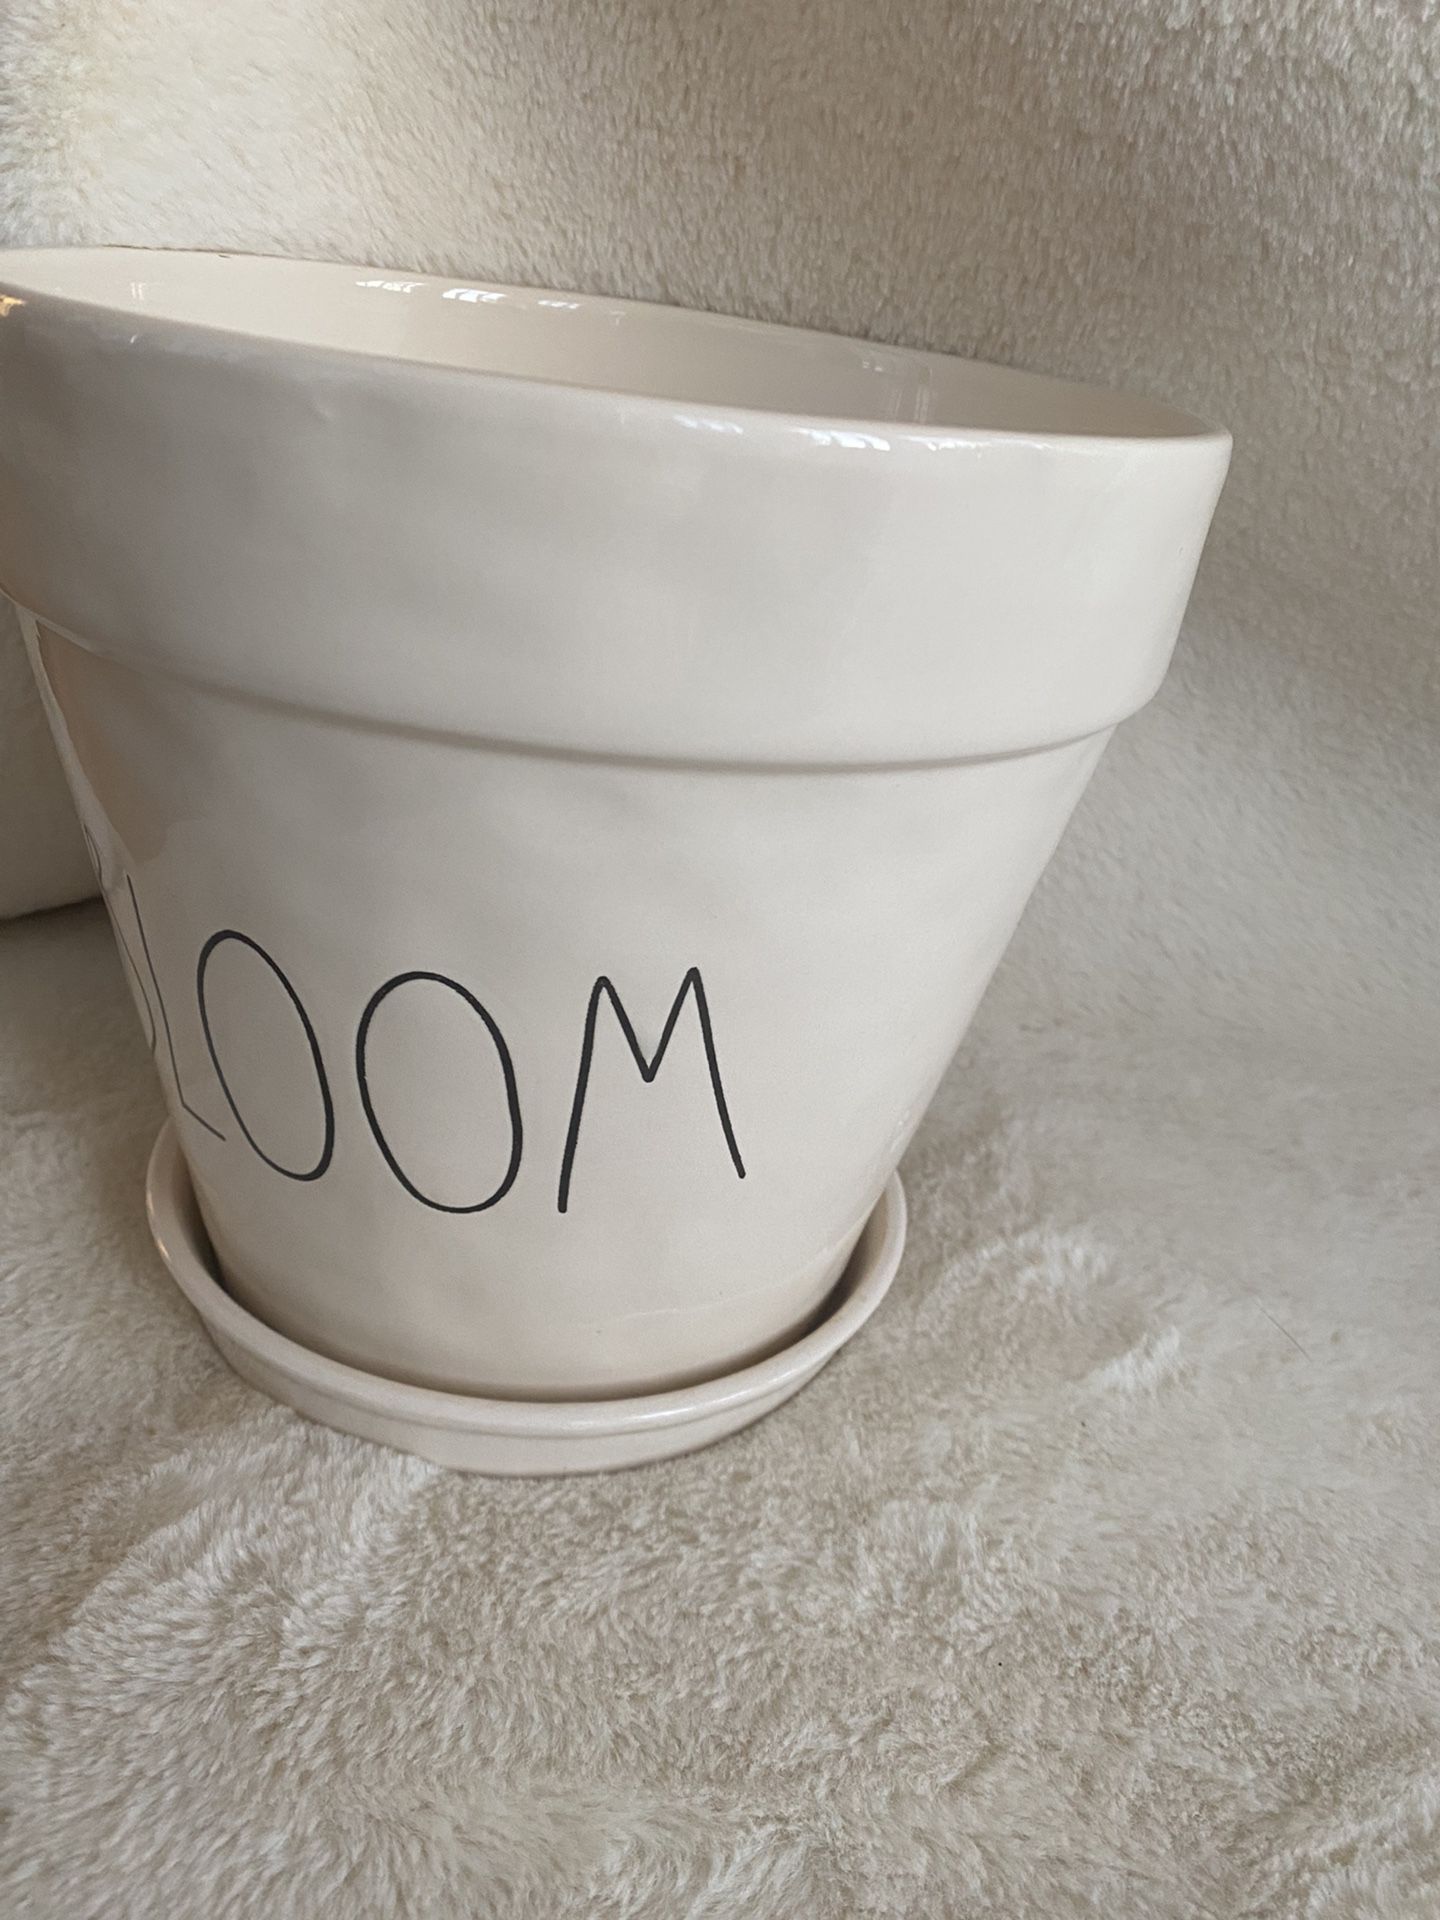 Rae Dunn BLOOM Large Ceramic Flower Pot Has drainage at bottom  No cracks, chips or defects on exterior Small hairline crack on inside bottom of pot -